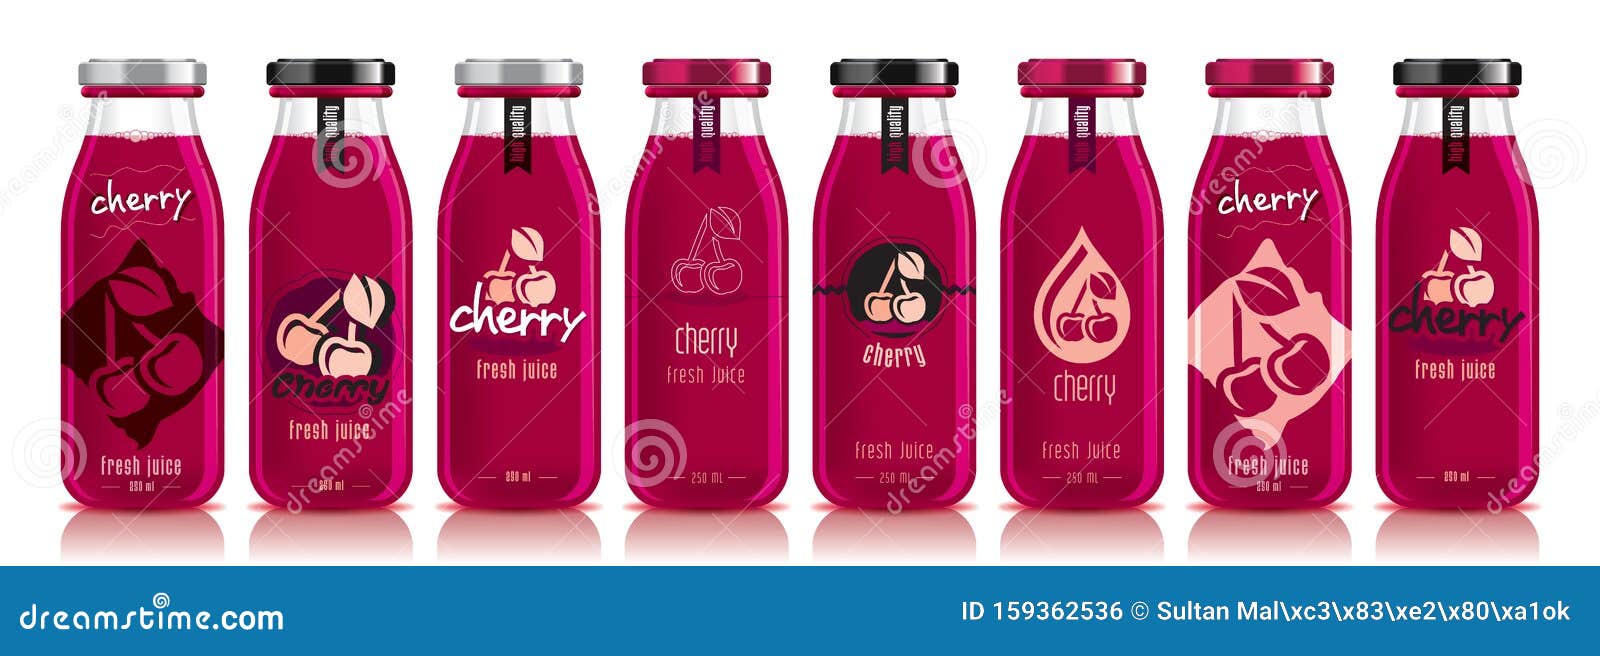 Download Cherry Juice Bottle Stock Illustrations 1 026 Cherry Juice Bottle Stock Illustrations Vectors Clipart Dreamstime Yellowimages Mockups